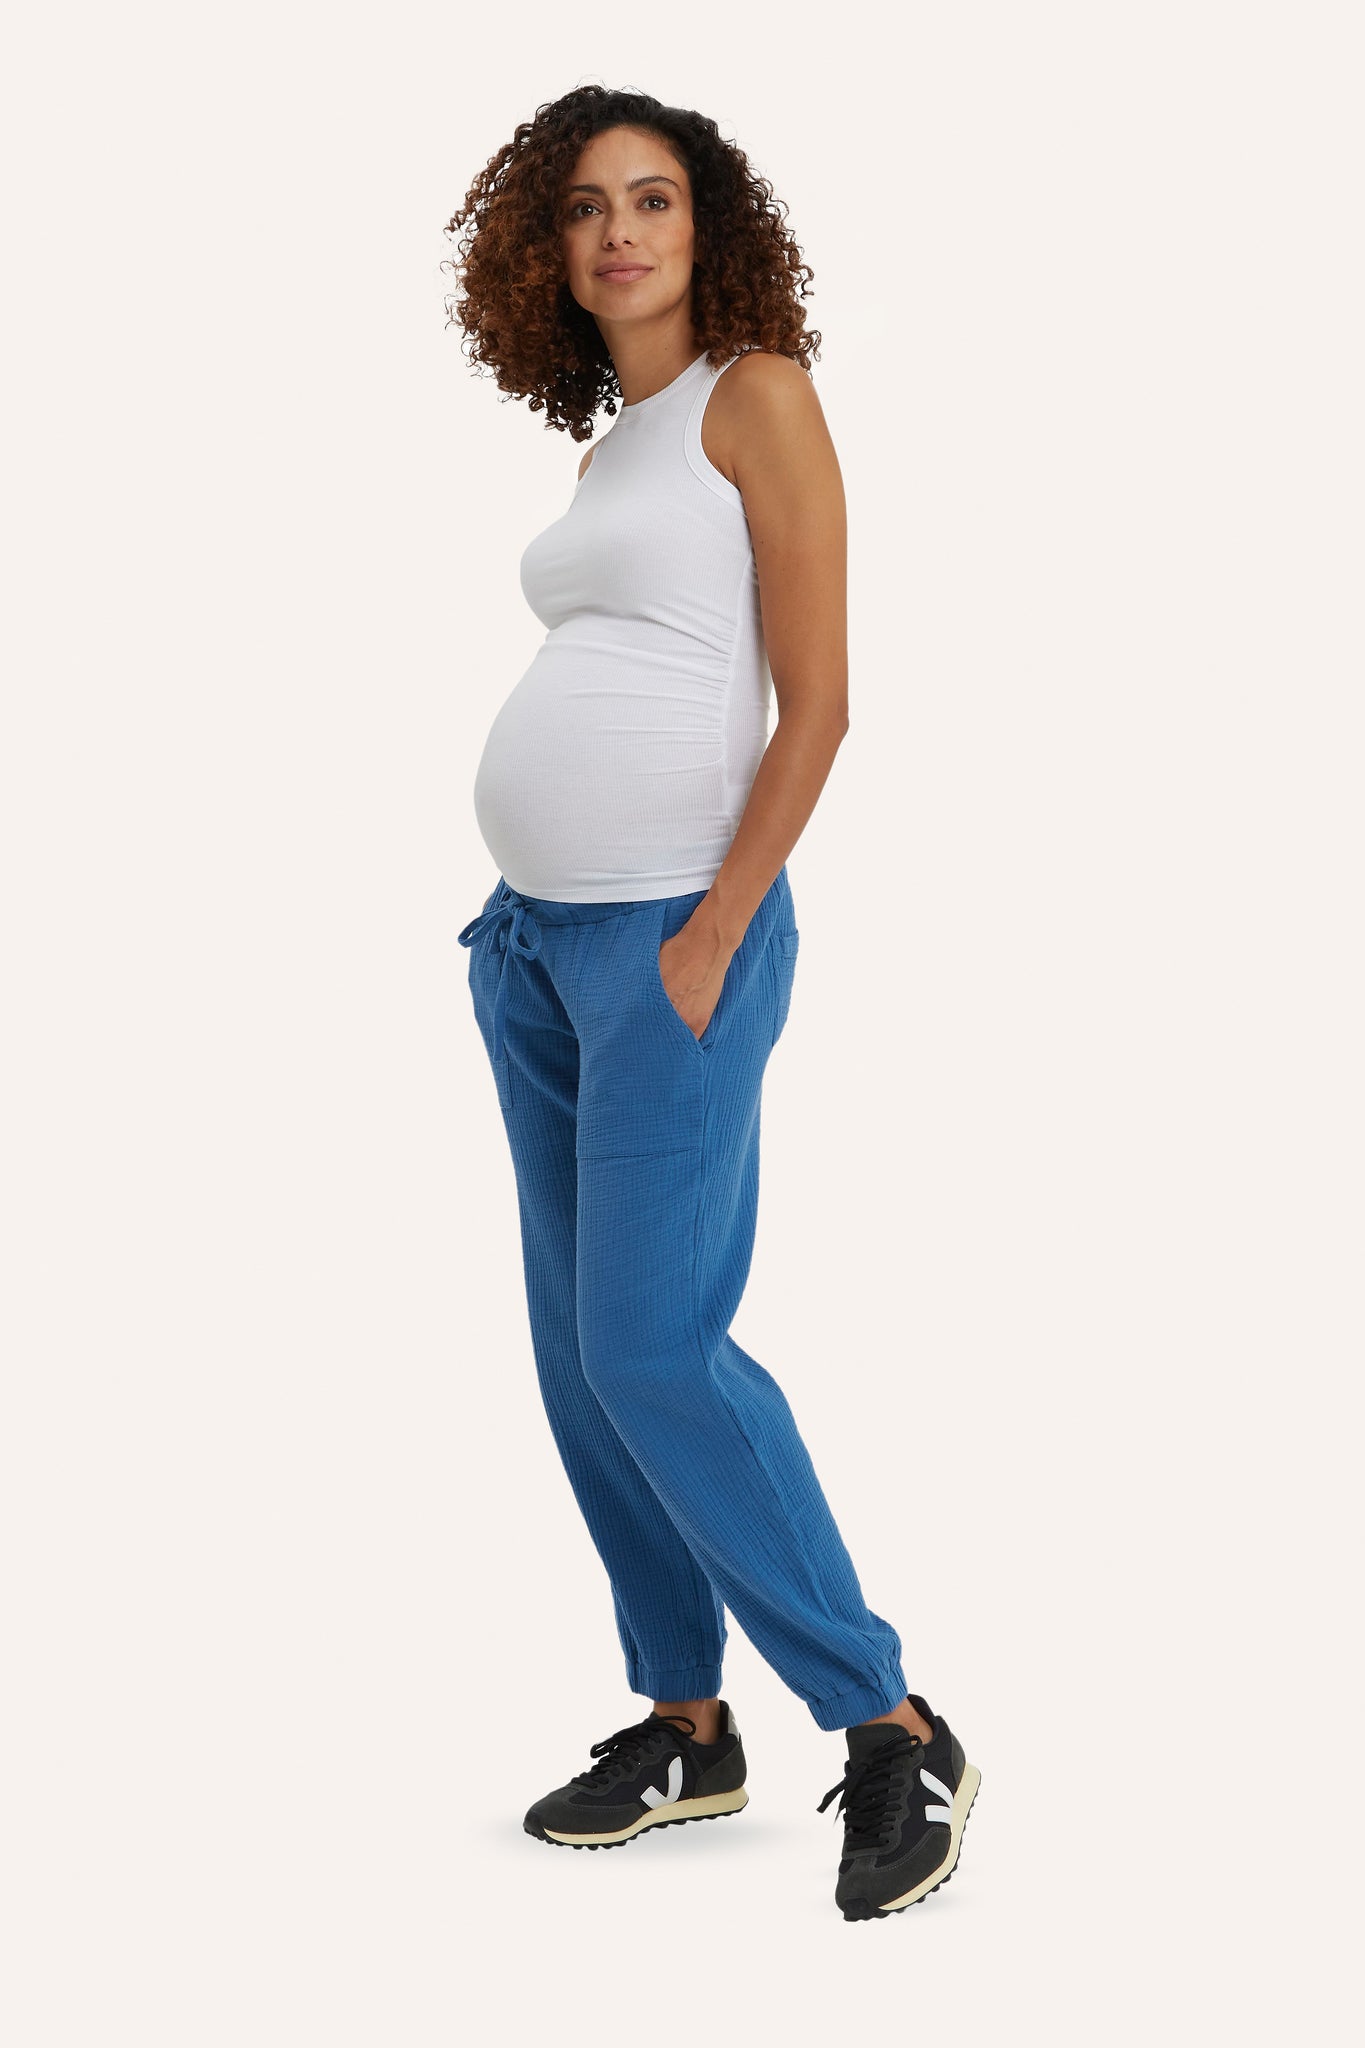 Chamonix Cotton During + After Maternity Jogger Pants